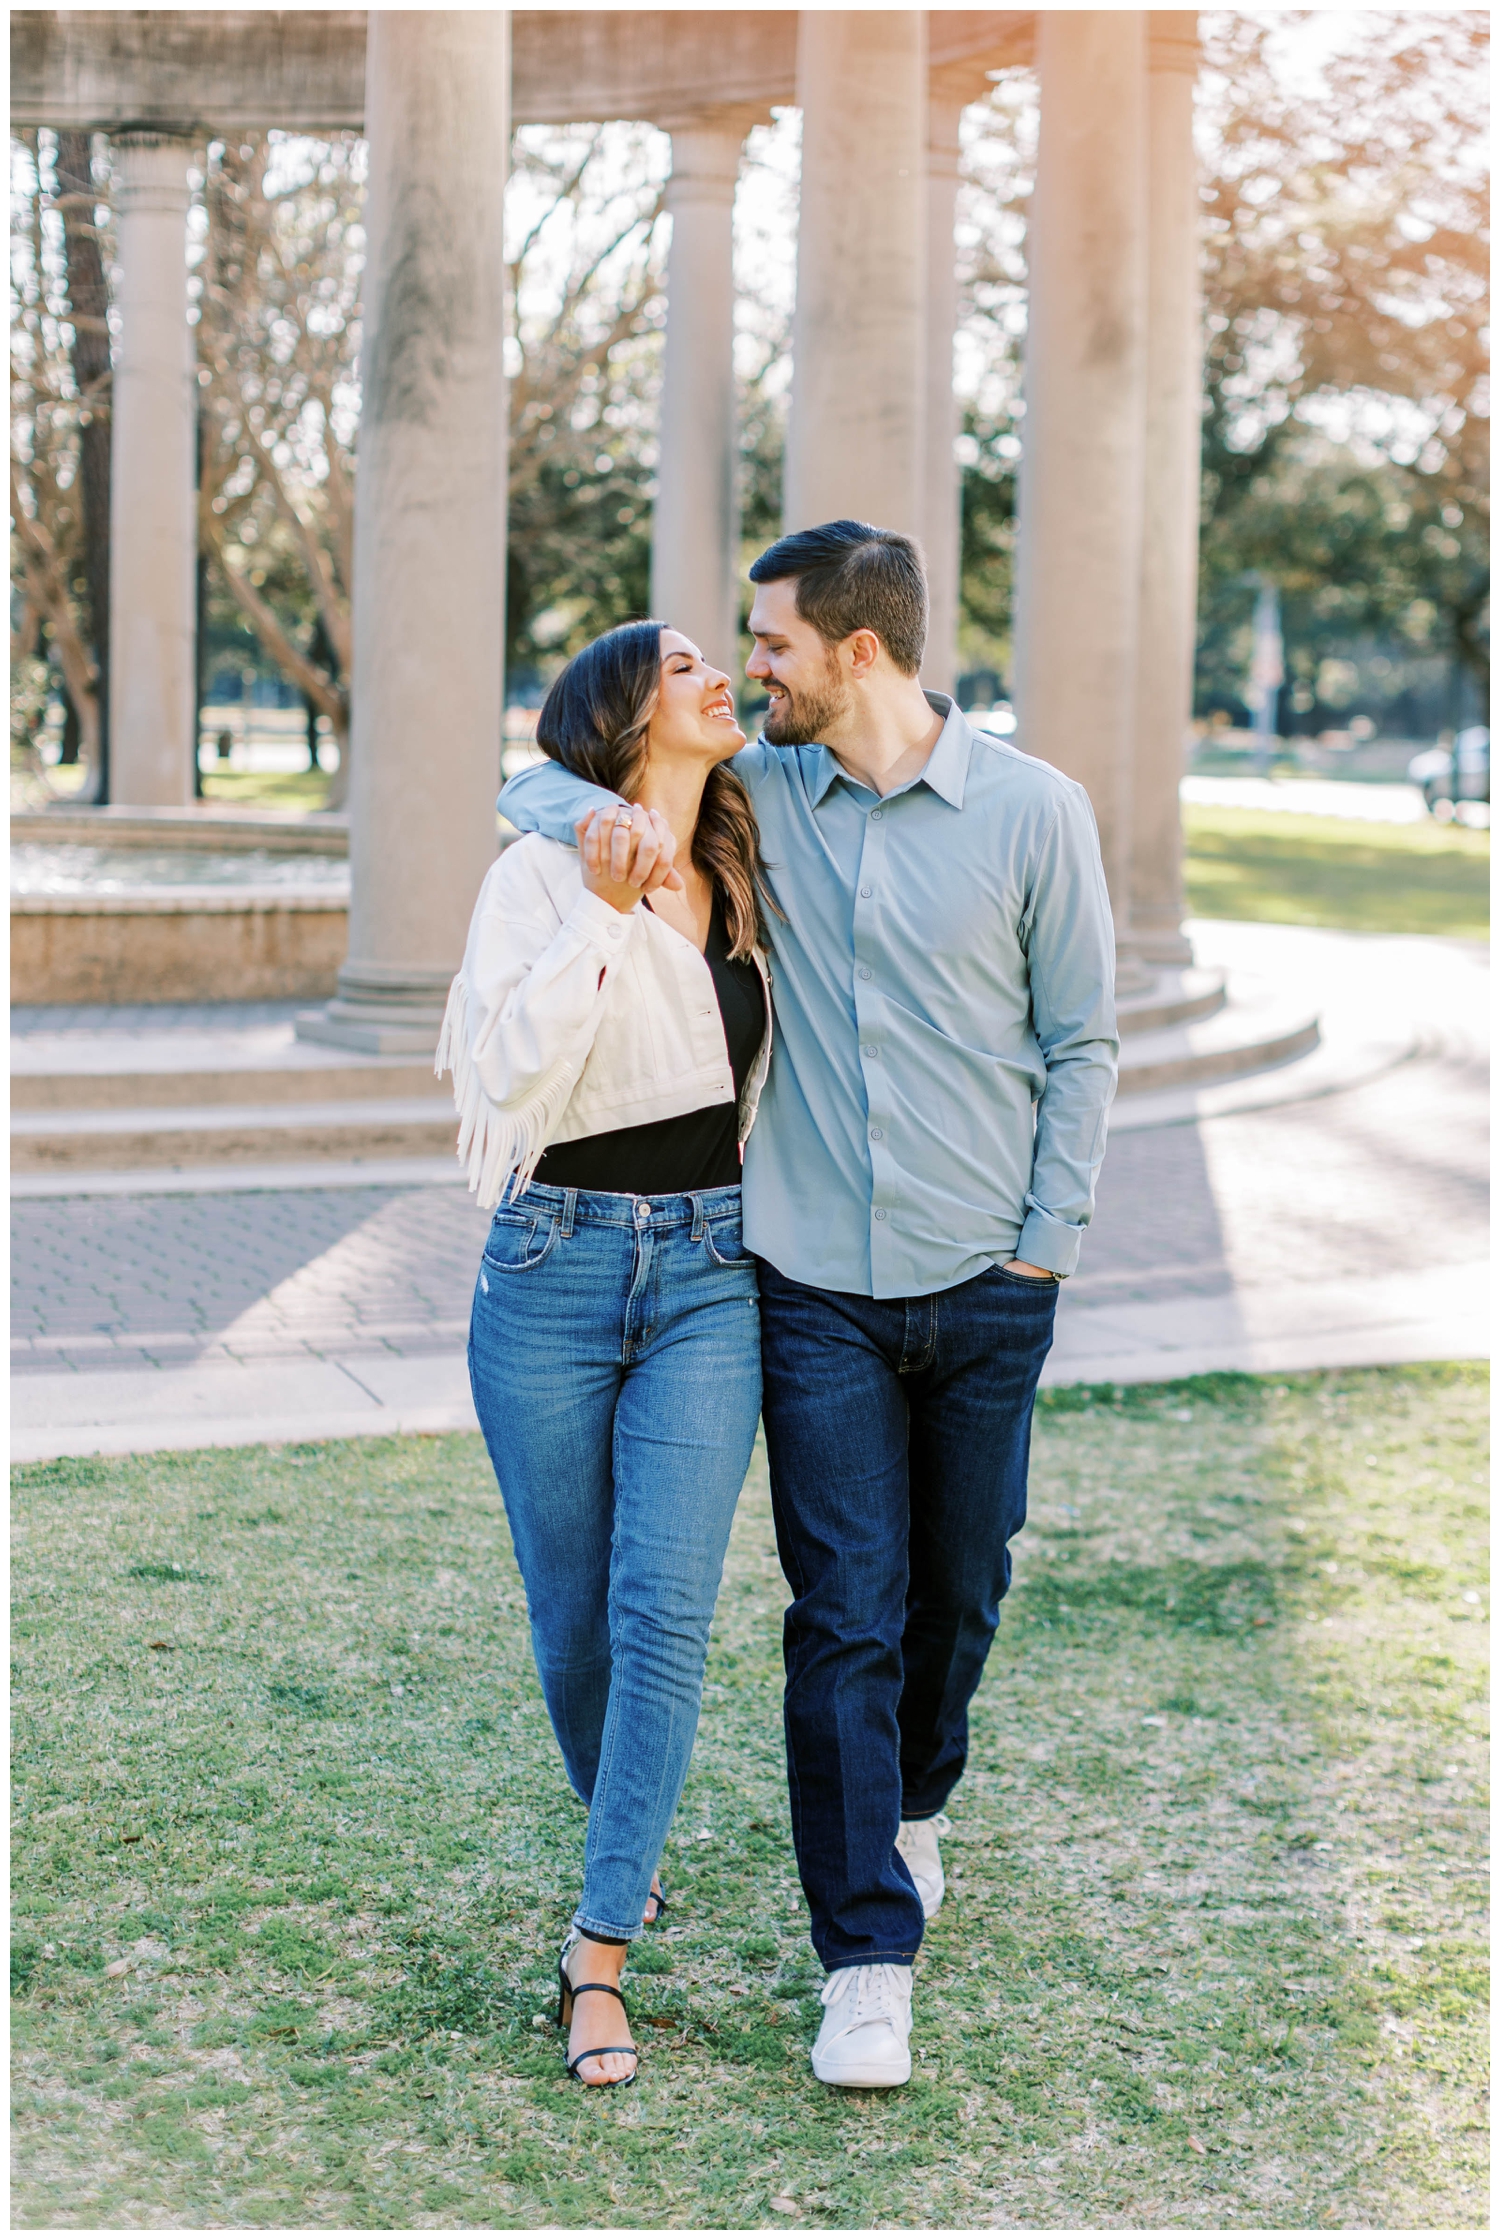 engaged couple walking and looking at each other wearing blue jeans